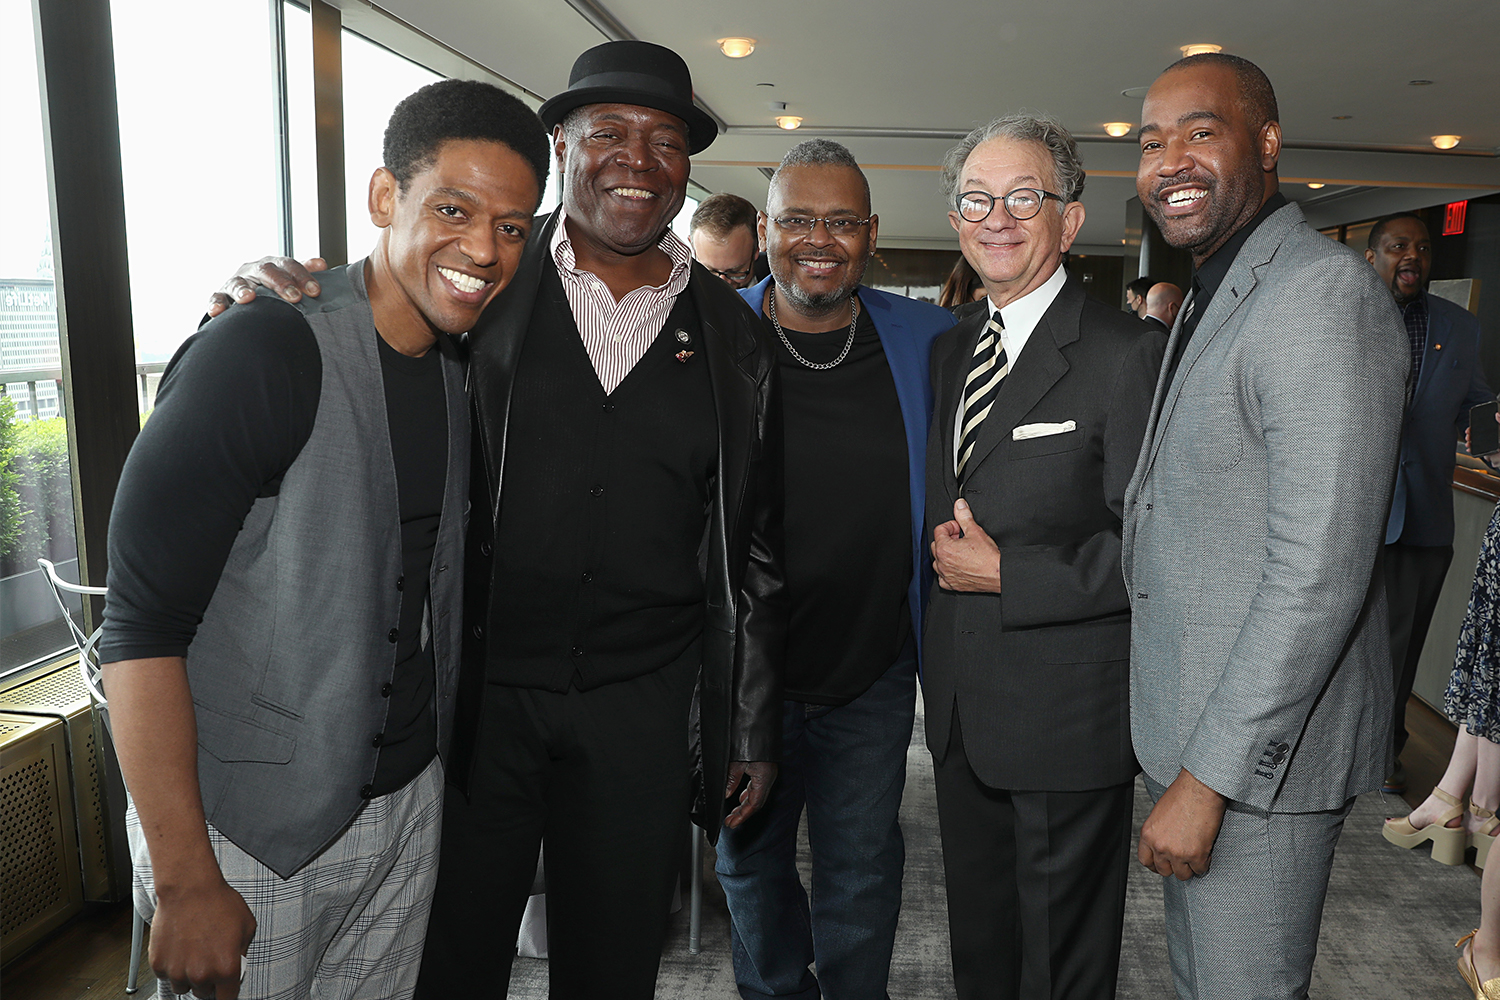 Jared Grimes, Chuck Cooper, Ron Simons, William Ivey Long and Emilio Sosa at the 75th Tony Awards Nominees’ Luncheon at the Rainbow Room.